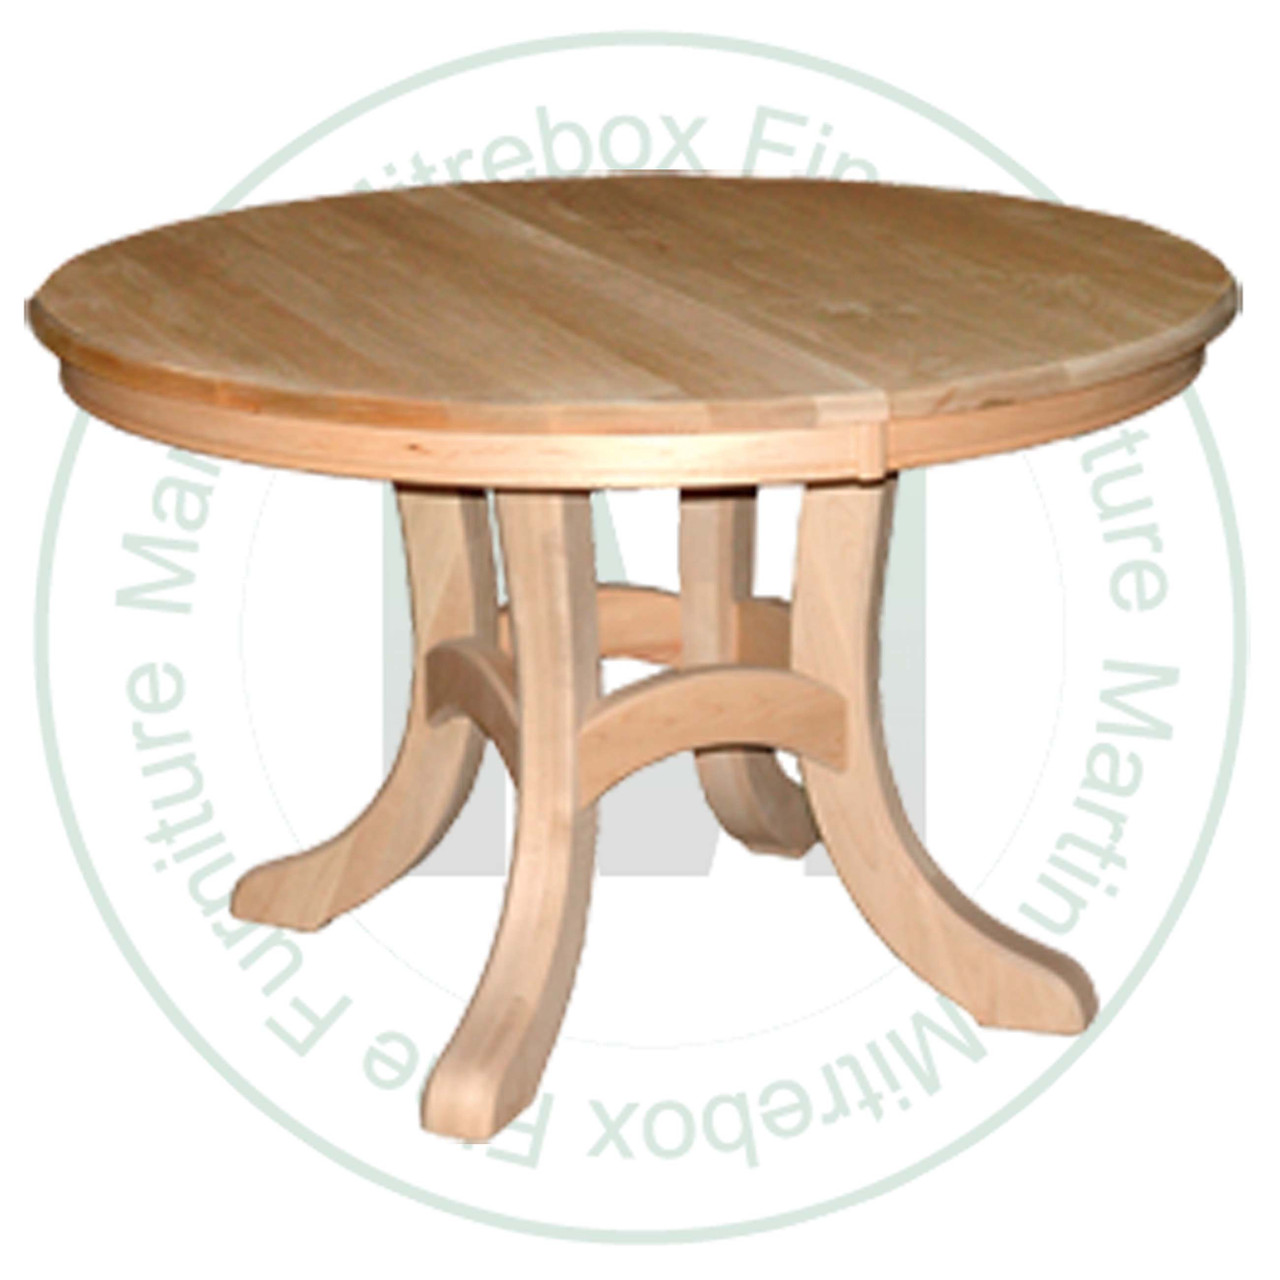 Oak Cairo Single Pedestal Table 54''D x 54''W x 30''H Round Solid Top Table